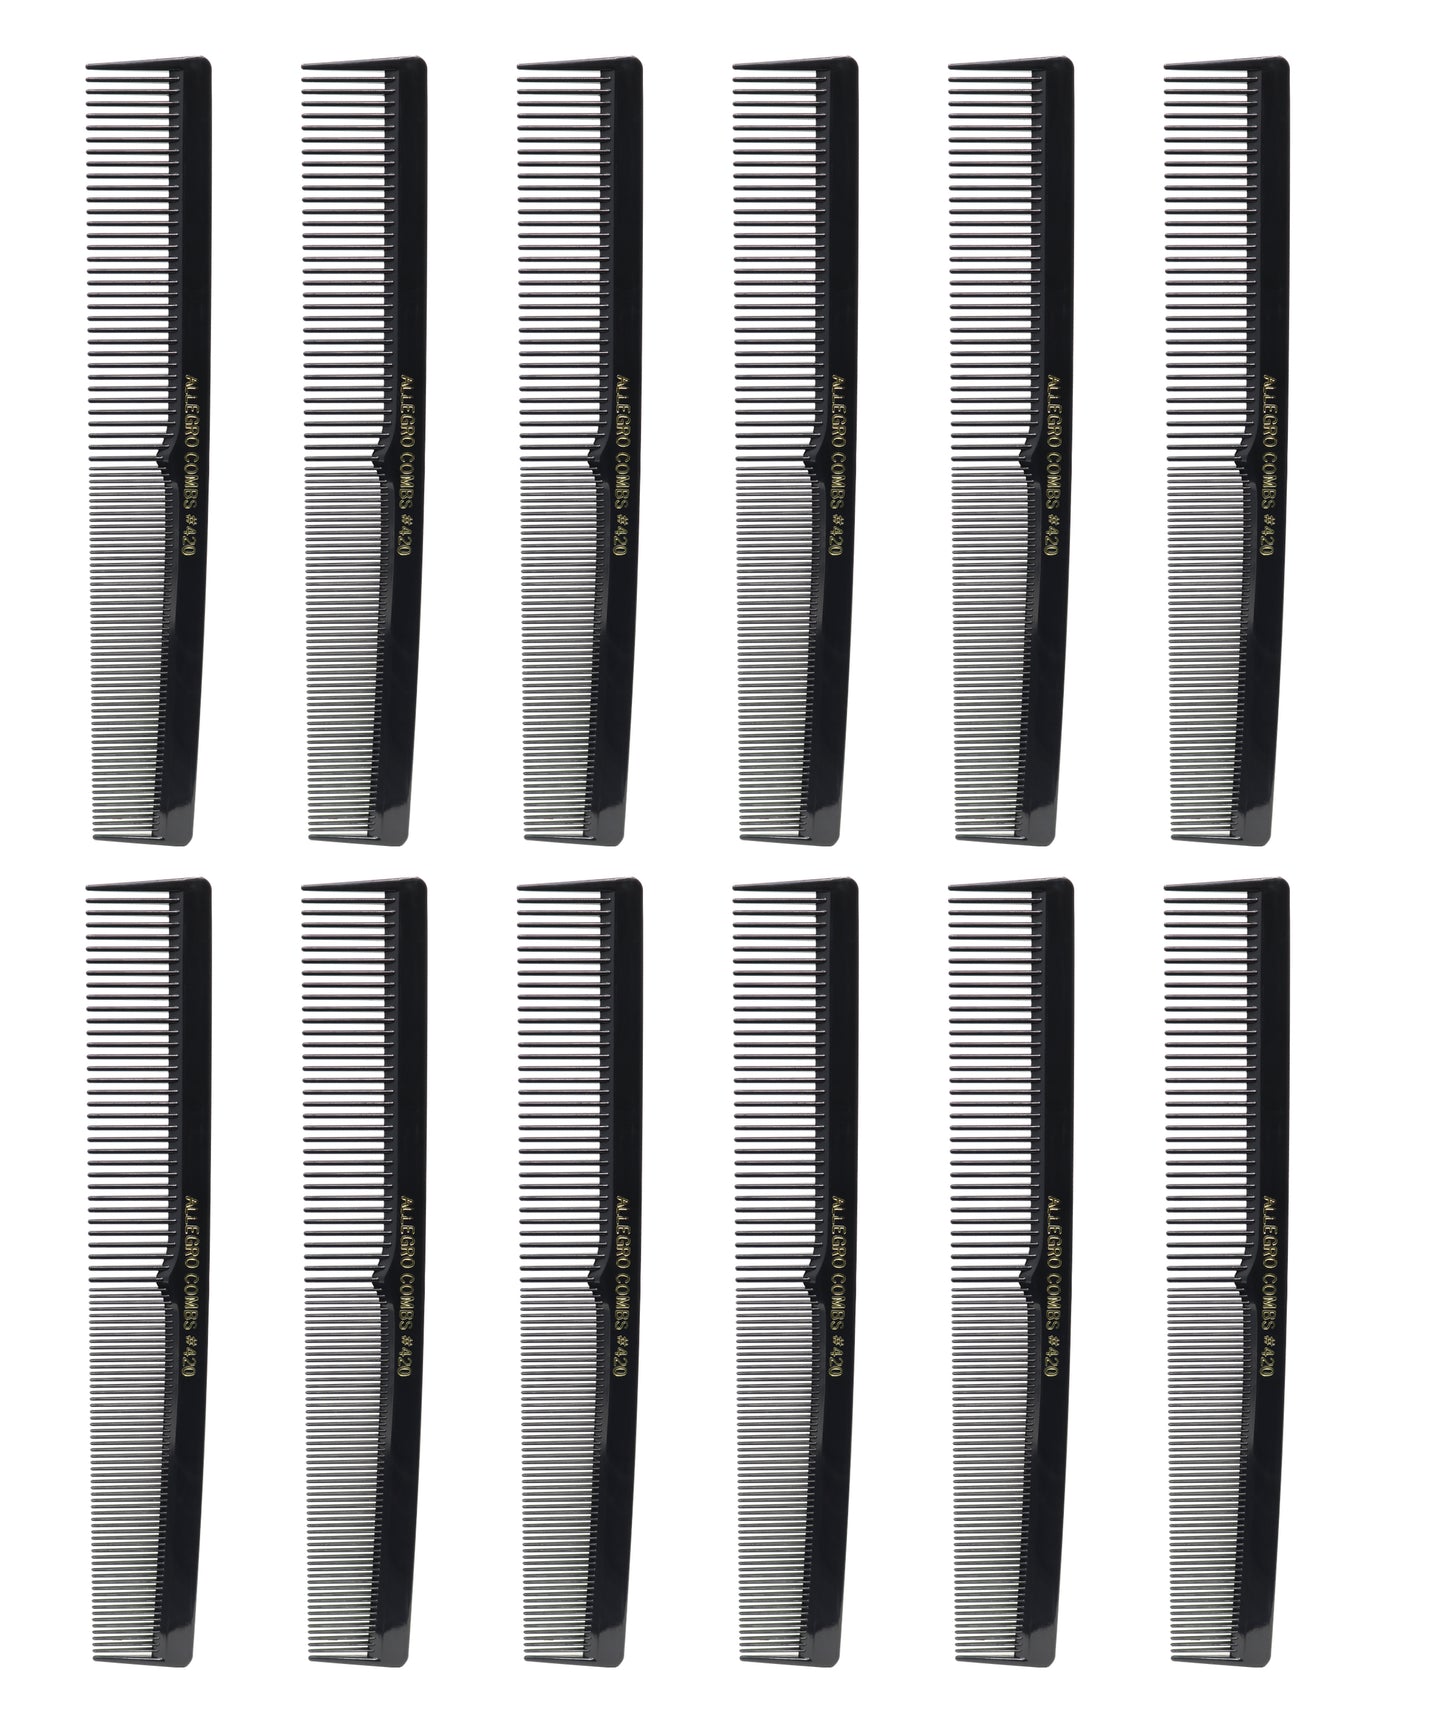 Allegro Combs 420 Barber Comb Comb Set Hair Cutting Combs Pocket Comb Combs for Hair Stylist Styling Comb 12 pk.